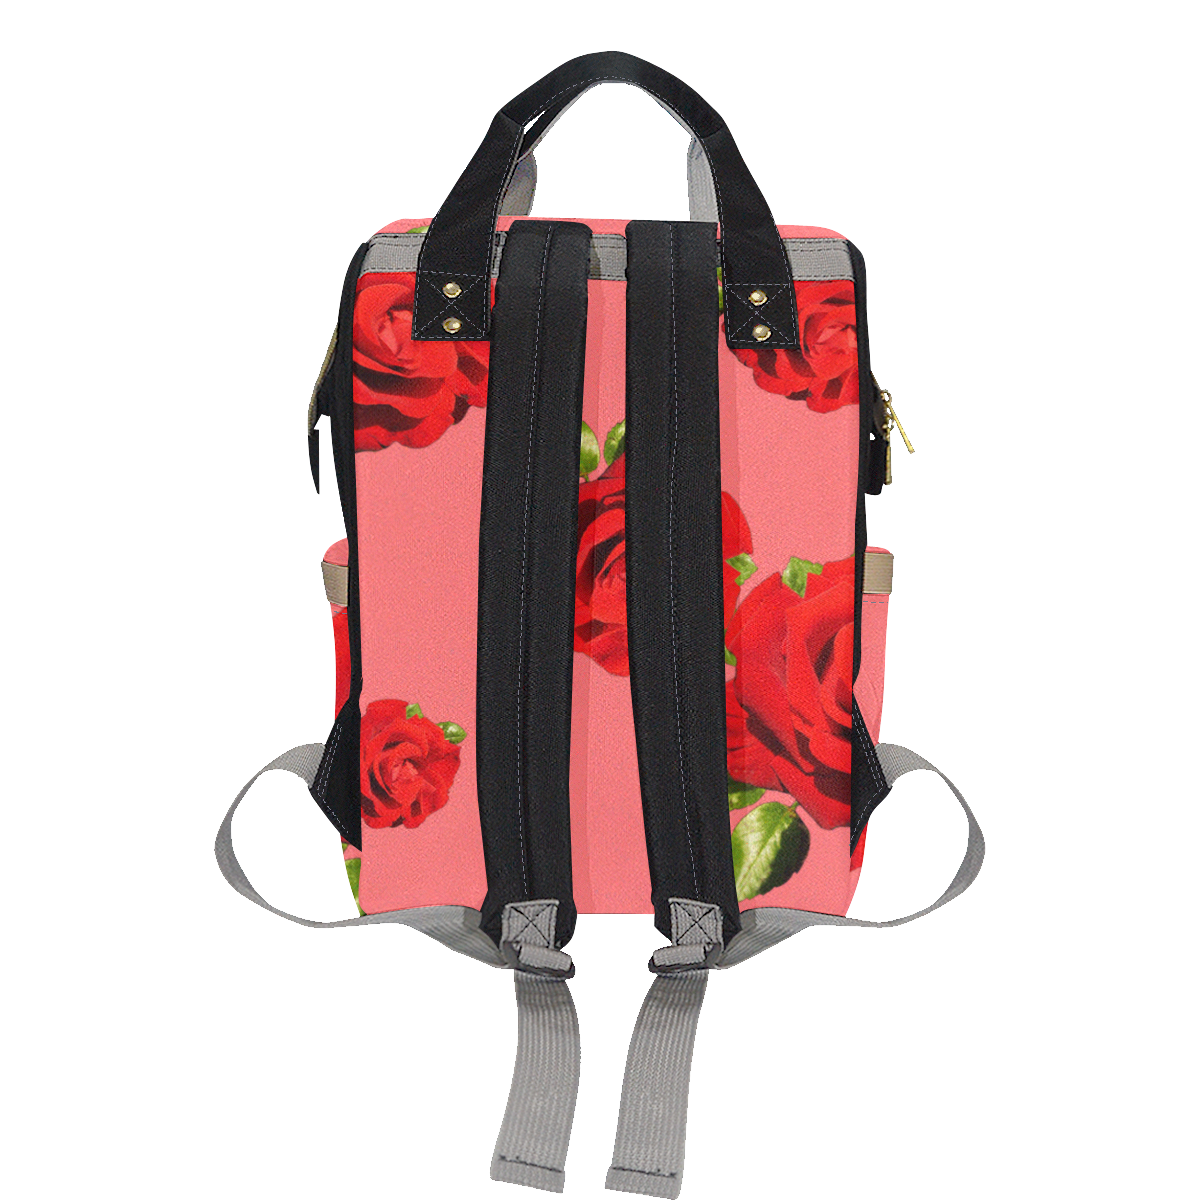 Fairlings Delight's Floral Luxury Collection- Red Rose Multi-Function Diaper Backpack 53086c10 Multi-Function Diaper Backpack/Diaper Bag (Model 1688)